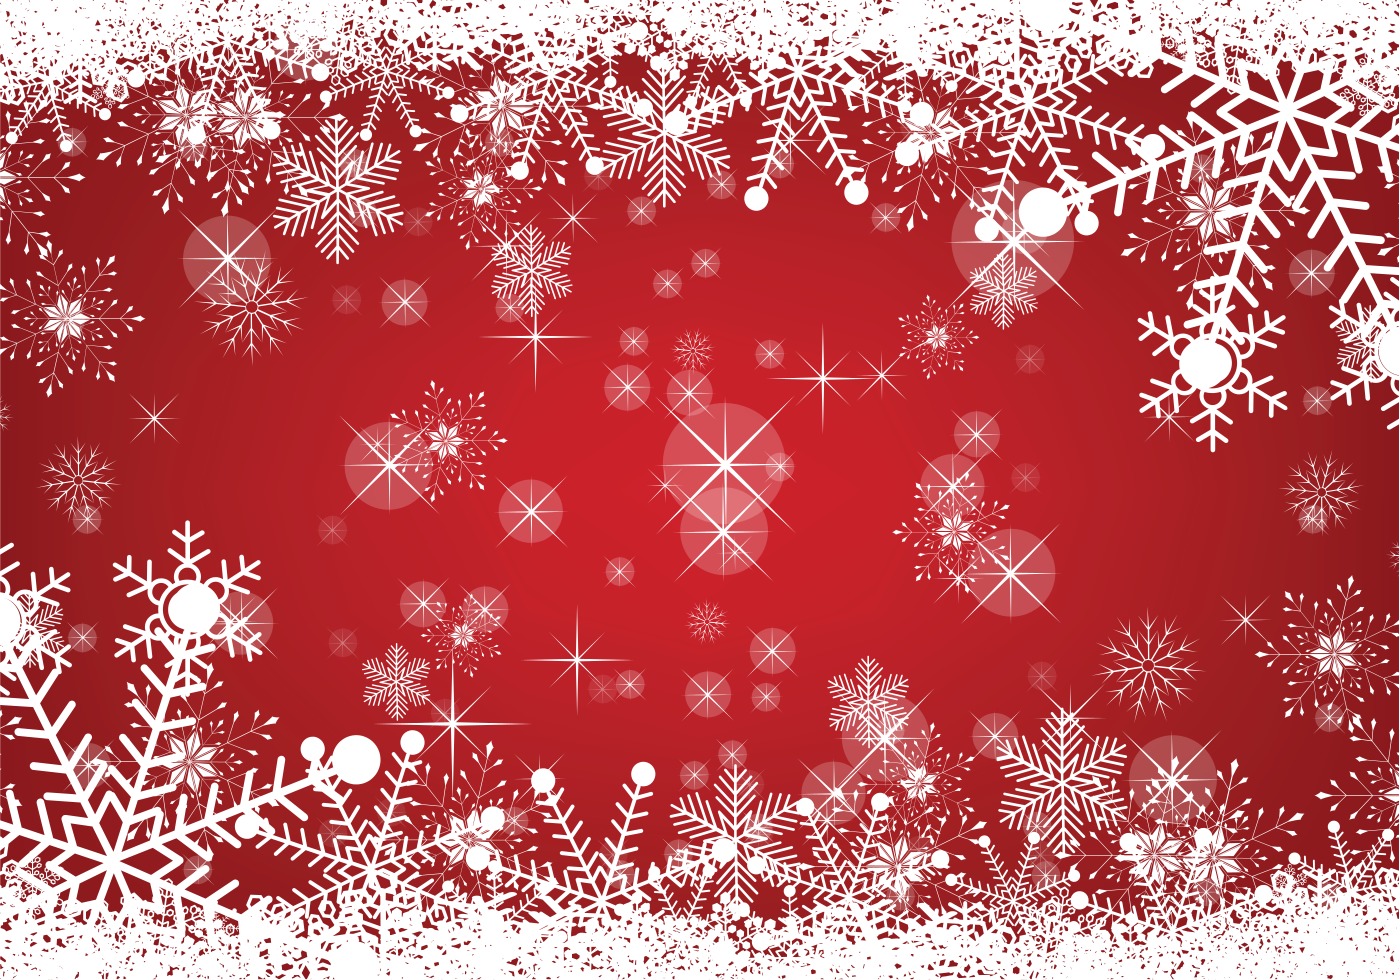 Red Christmas Background Free Vector Art   3656 Free Downloads